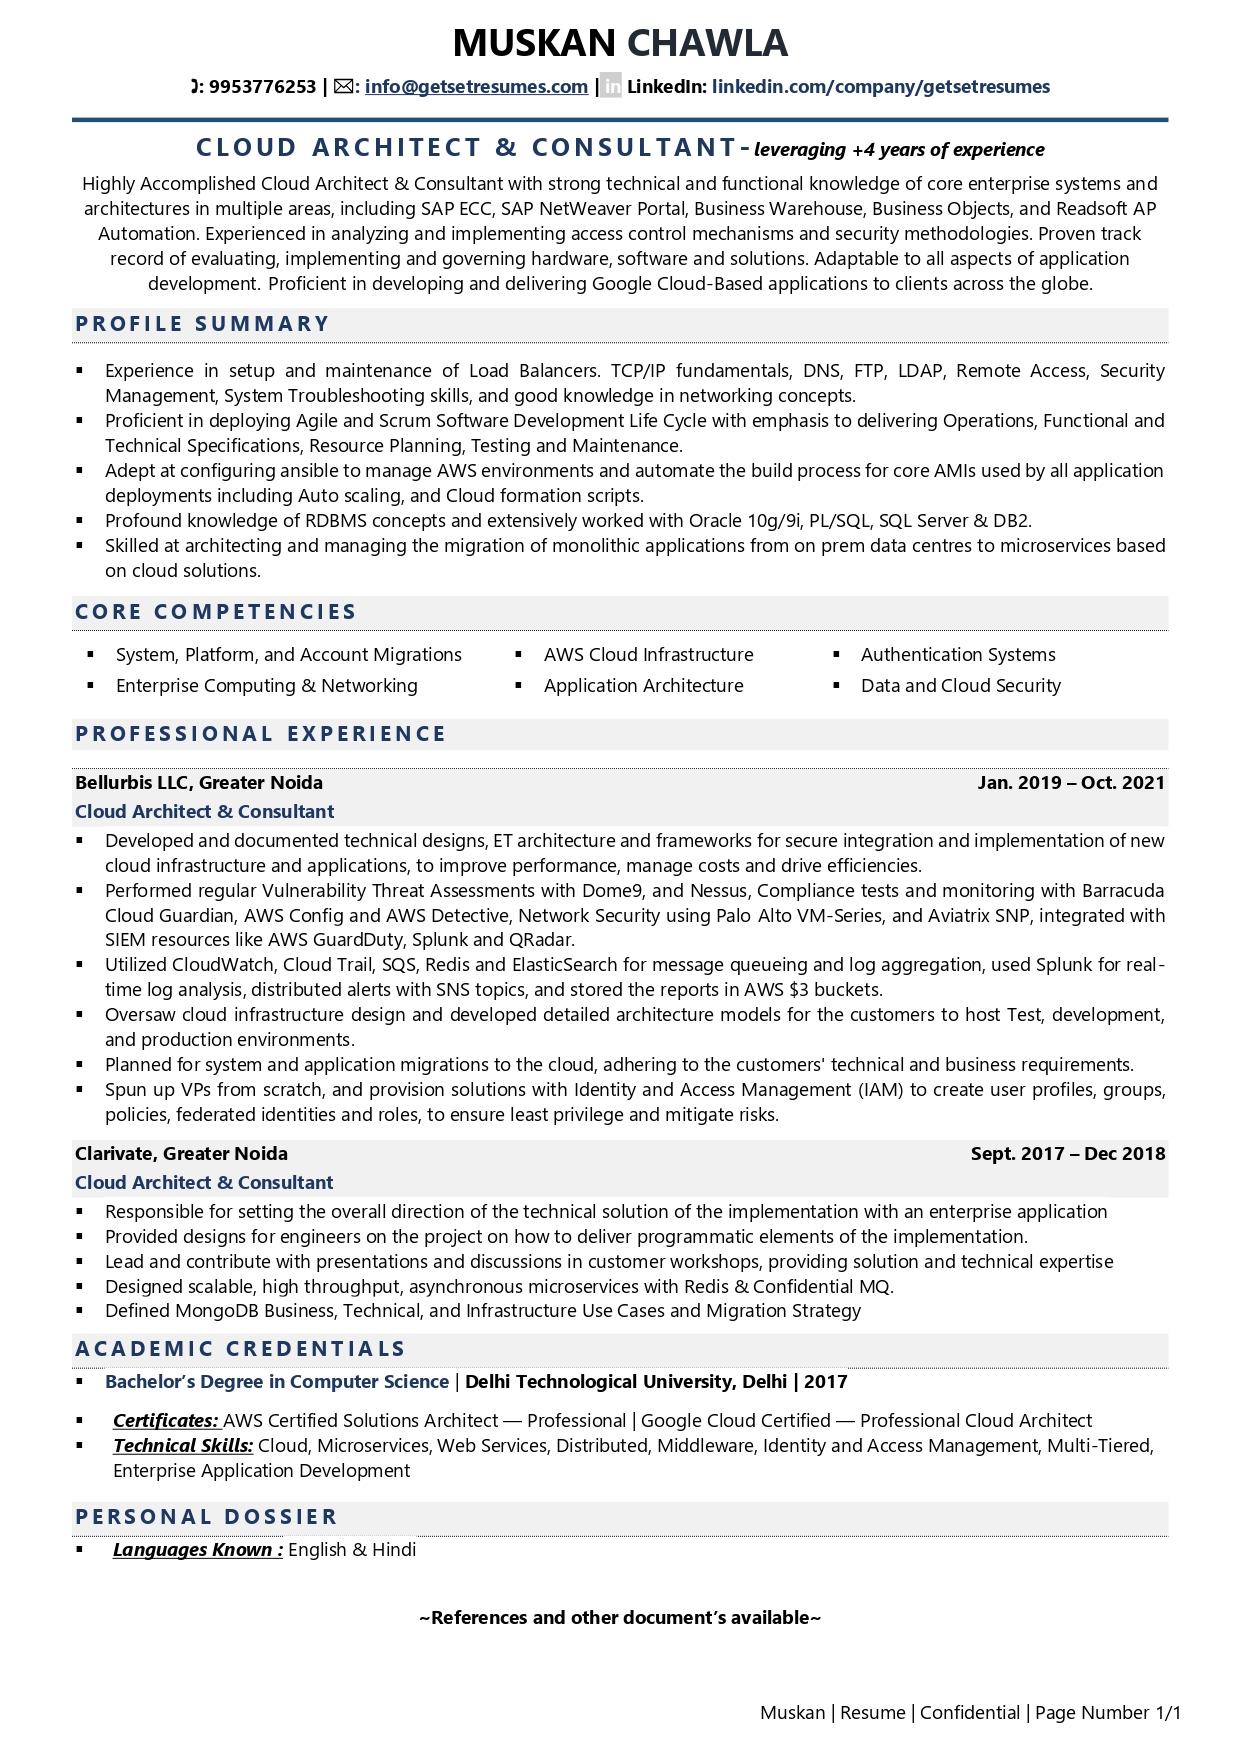 Cloud Architect & Consultant - Resume Example & Template